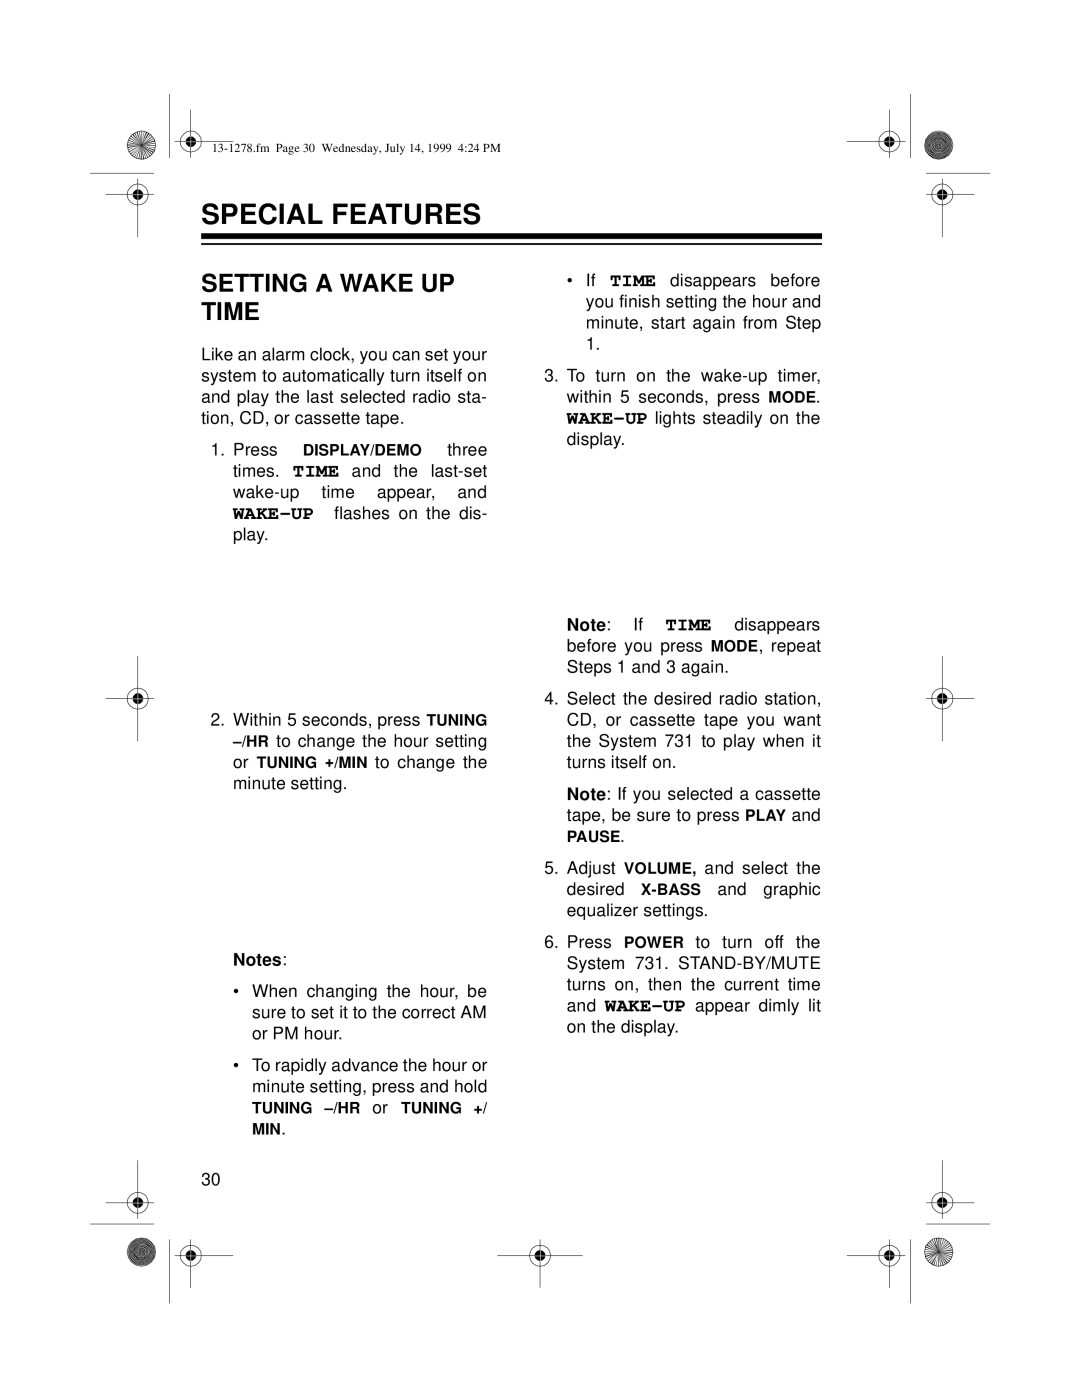 Optimus 731 owner manual Special Features, Setting A Wake Up Time 